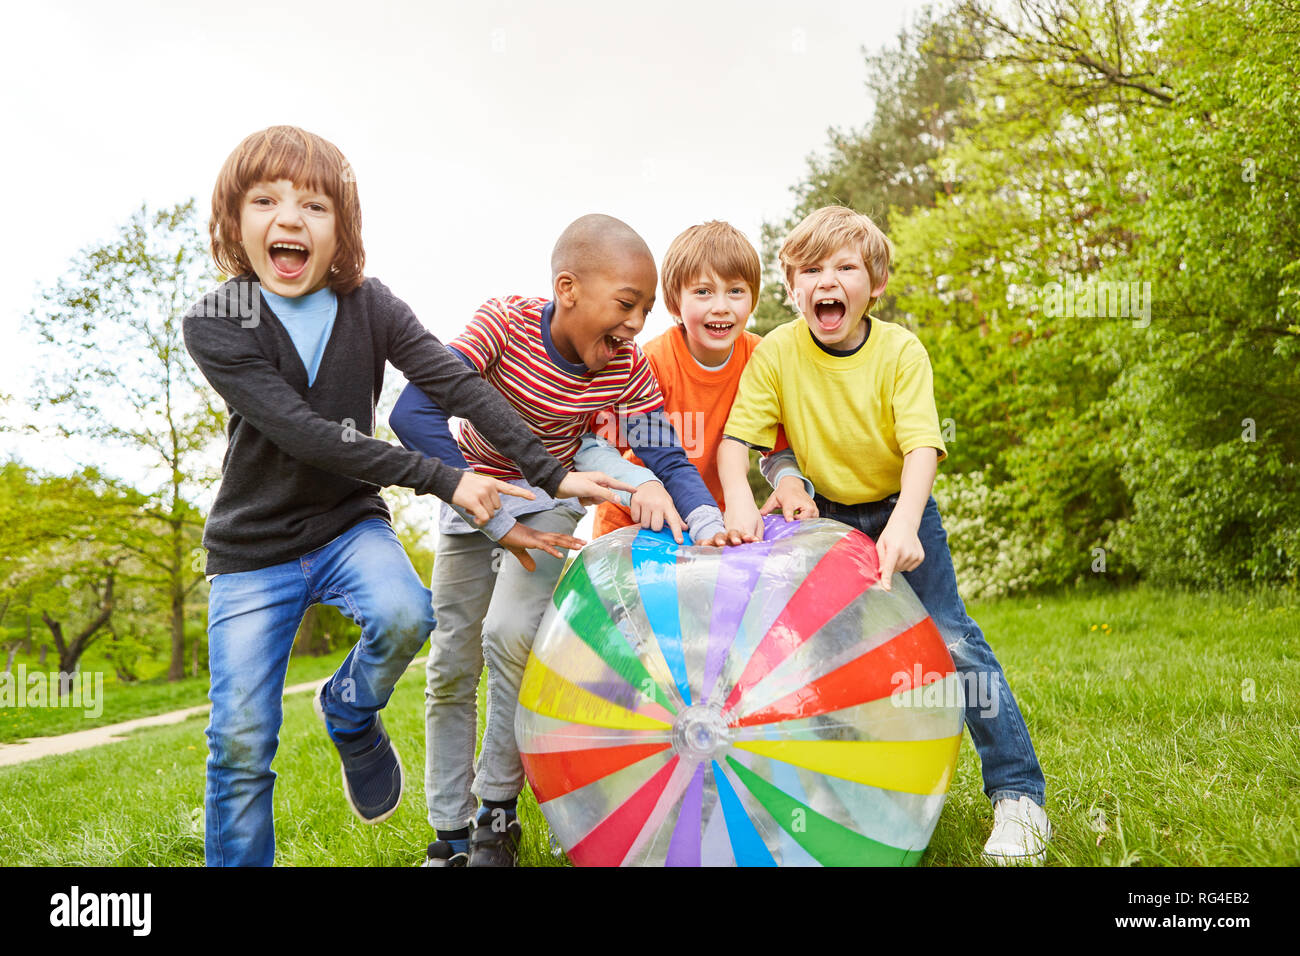 Kids have fun and laugh together while playing with a colorful big ball Stock Photo